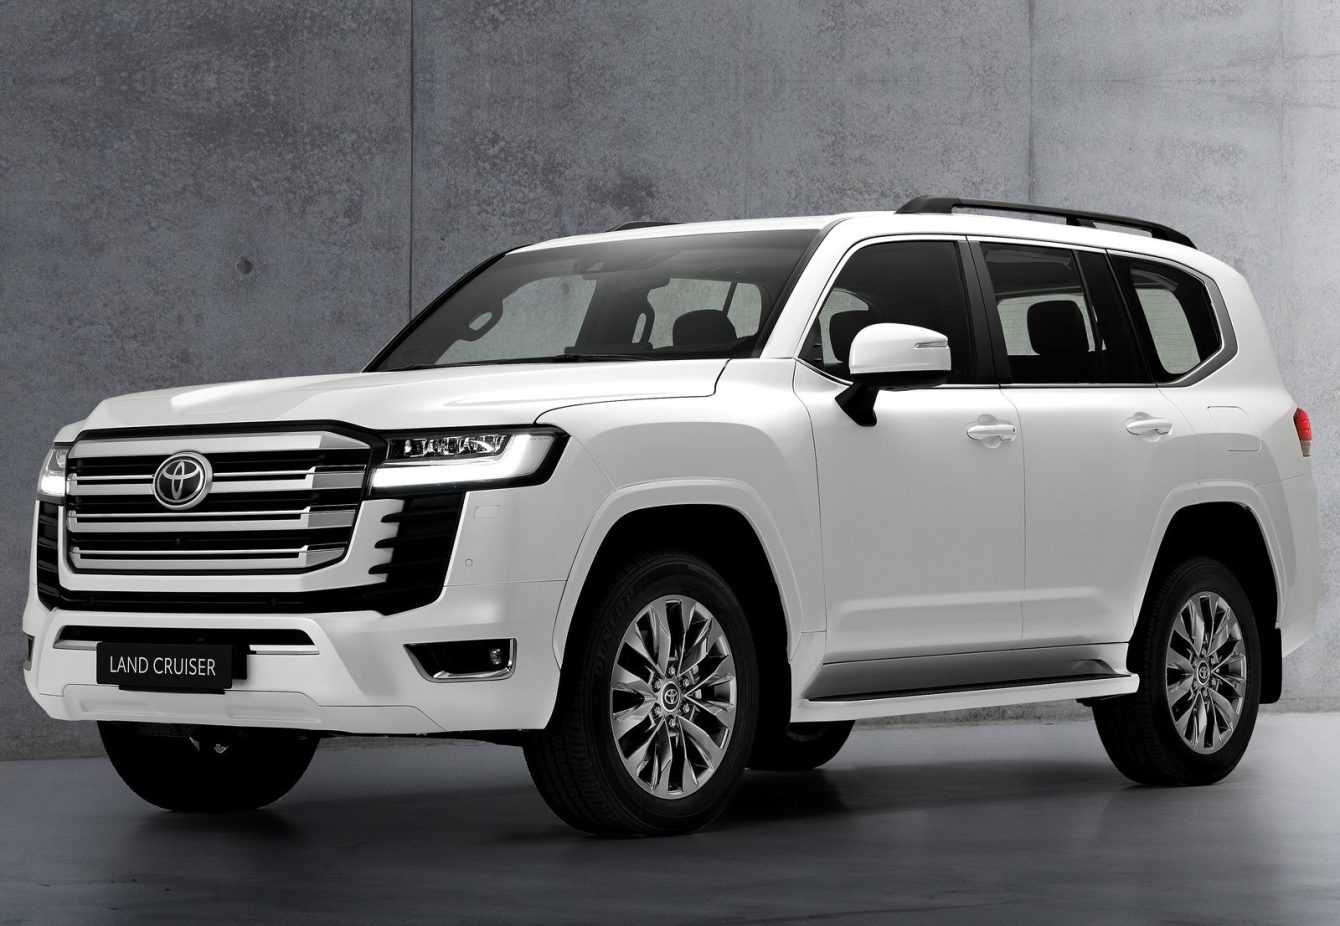 Toyota Land Cruiser 250: a new version of the Japanese SUV soon on the roads!